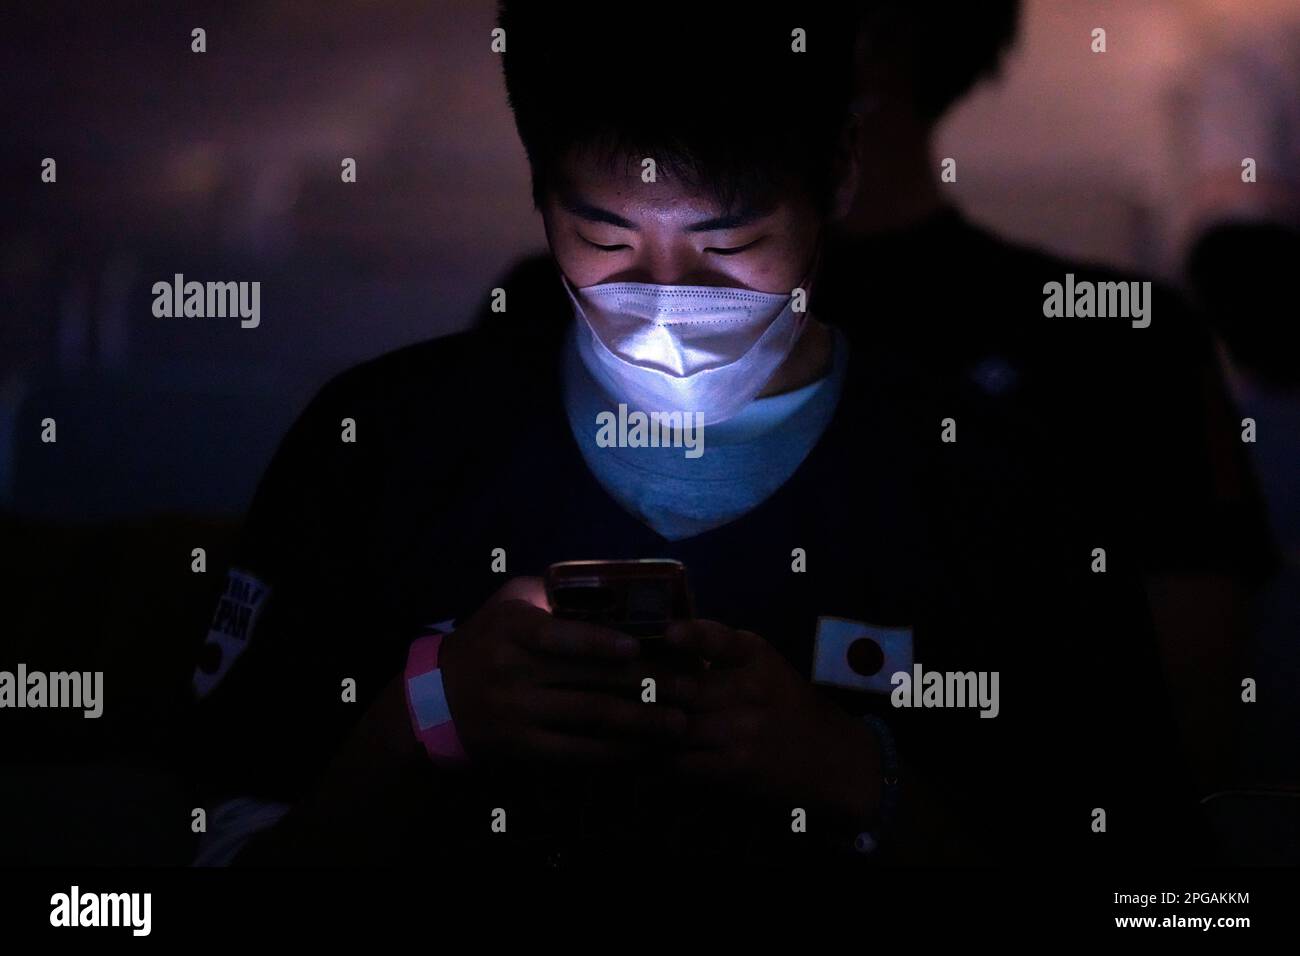 One of Japan fans uses a mobile phone before he watches on a live stream of a World Baseball Classic (WBC) final between Japan and United States being played at LoanDepot Park